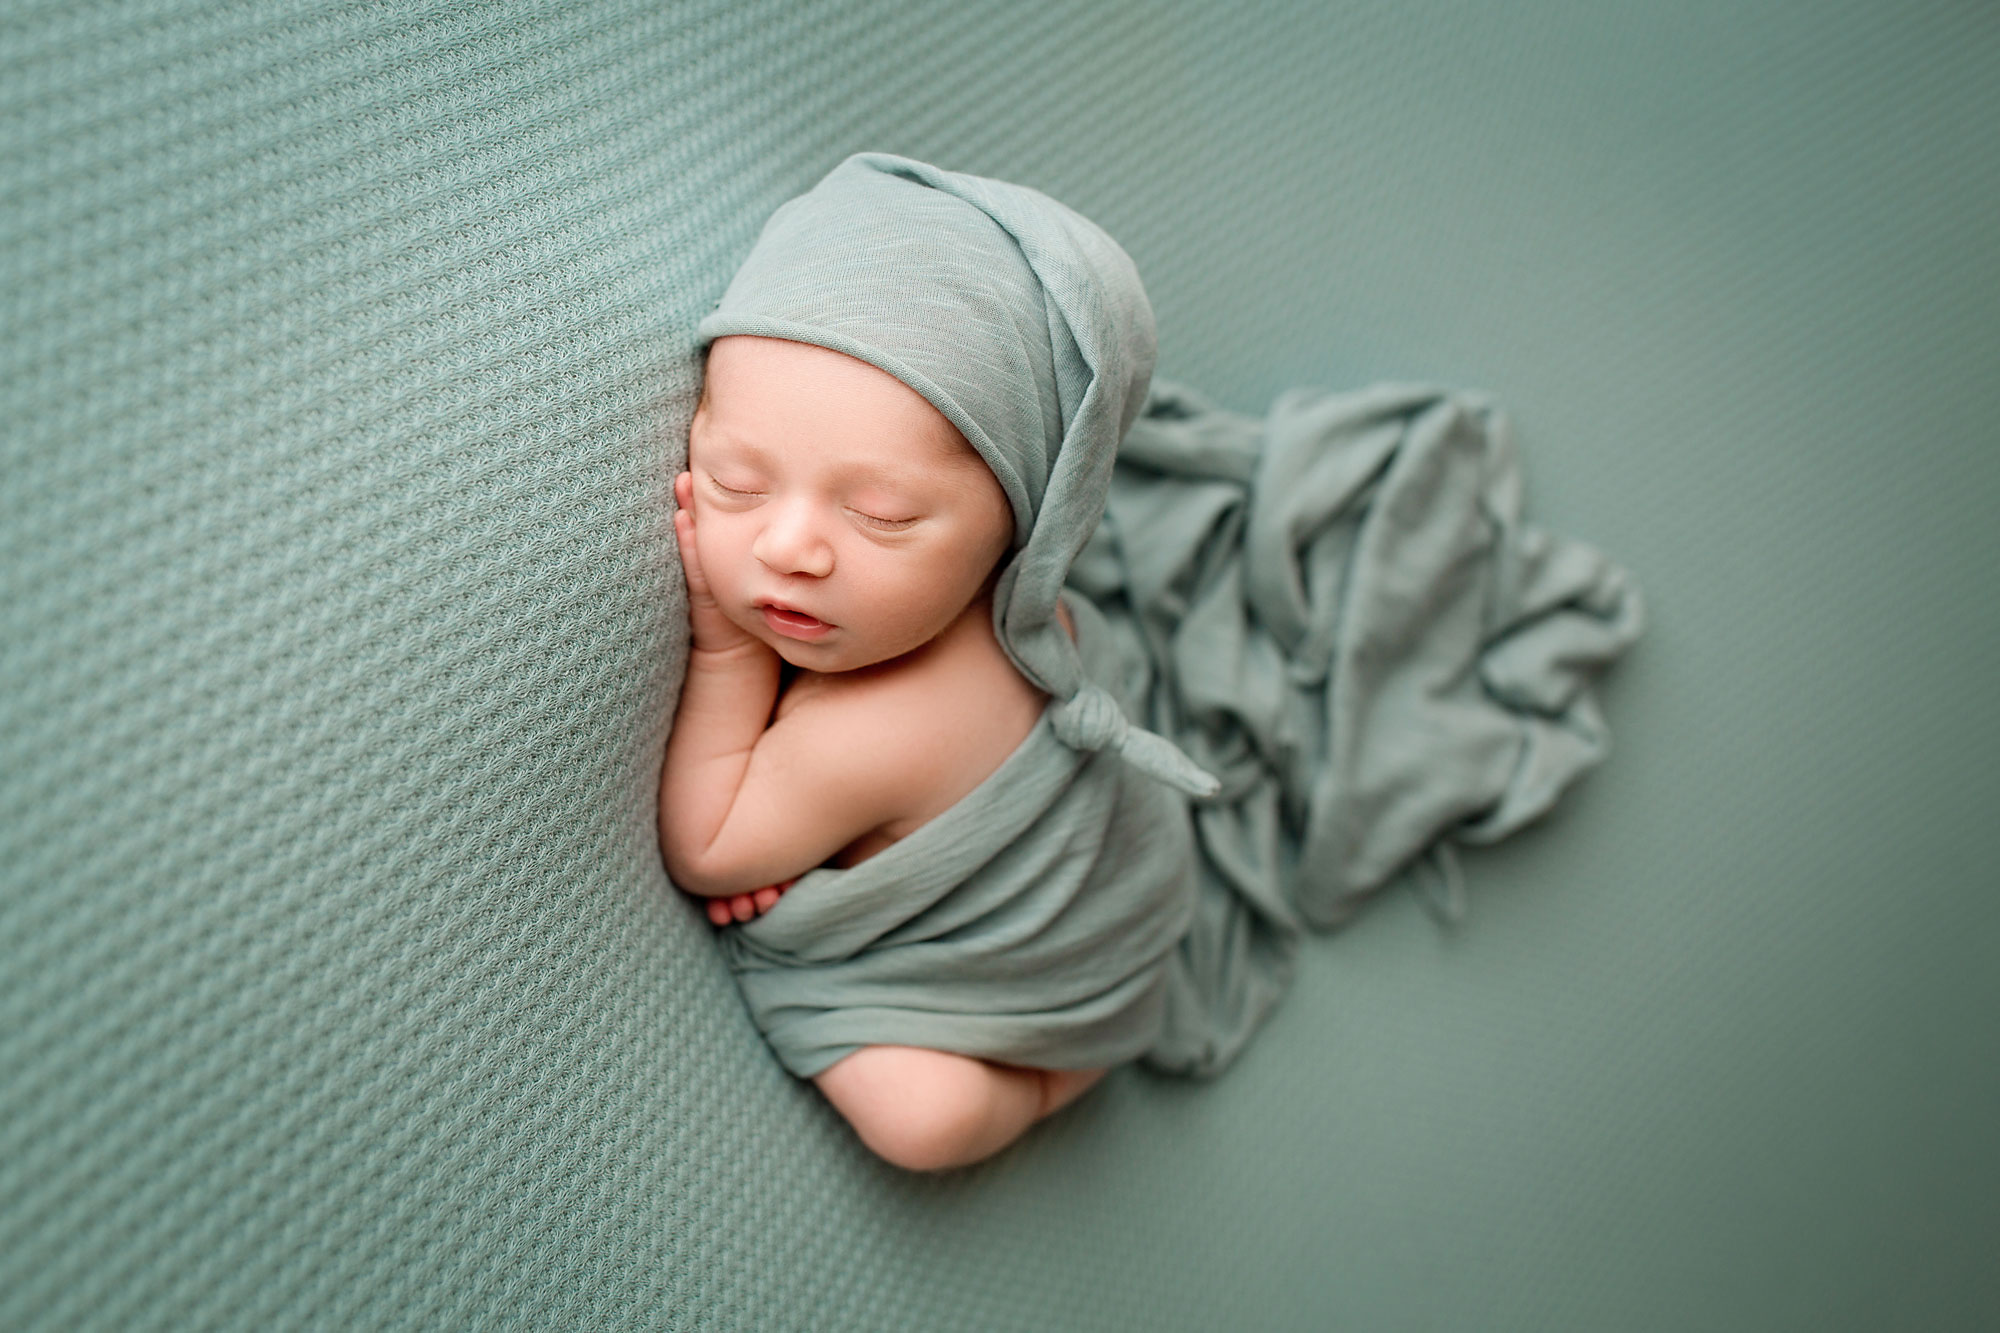 branchburg professional baby photos, baby boy asleep in teal swaddle and matching cap